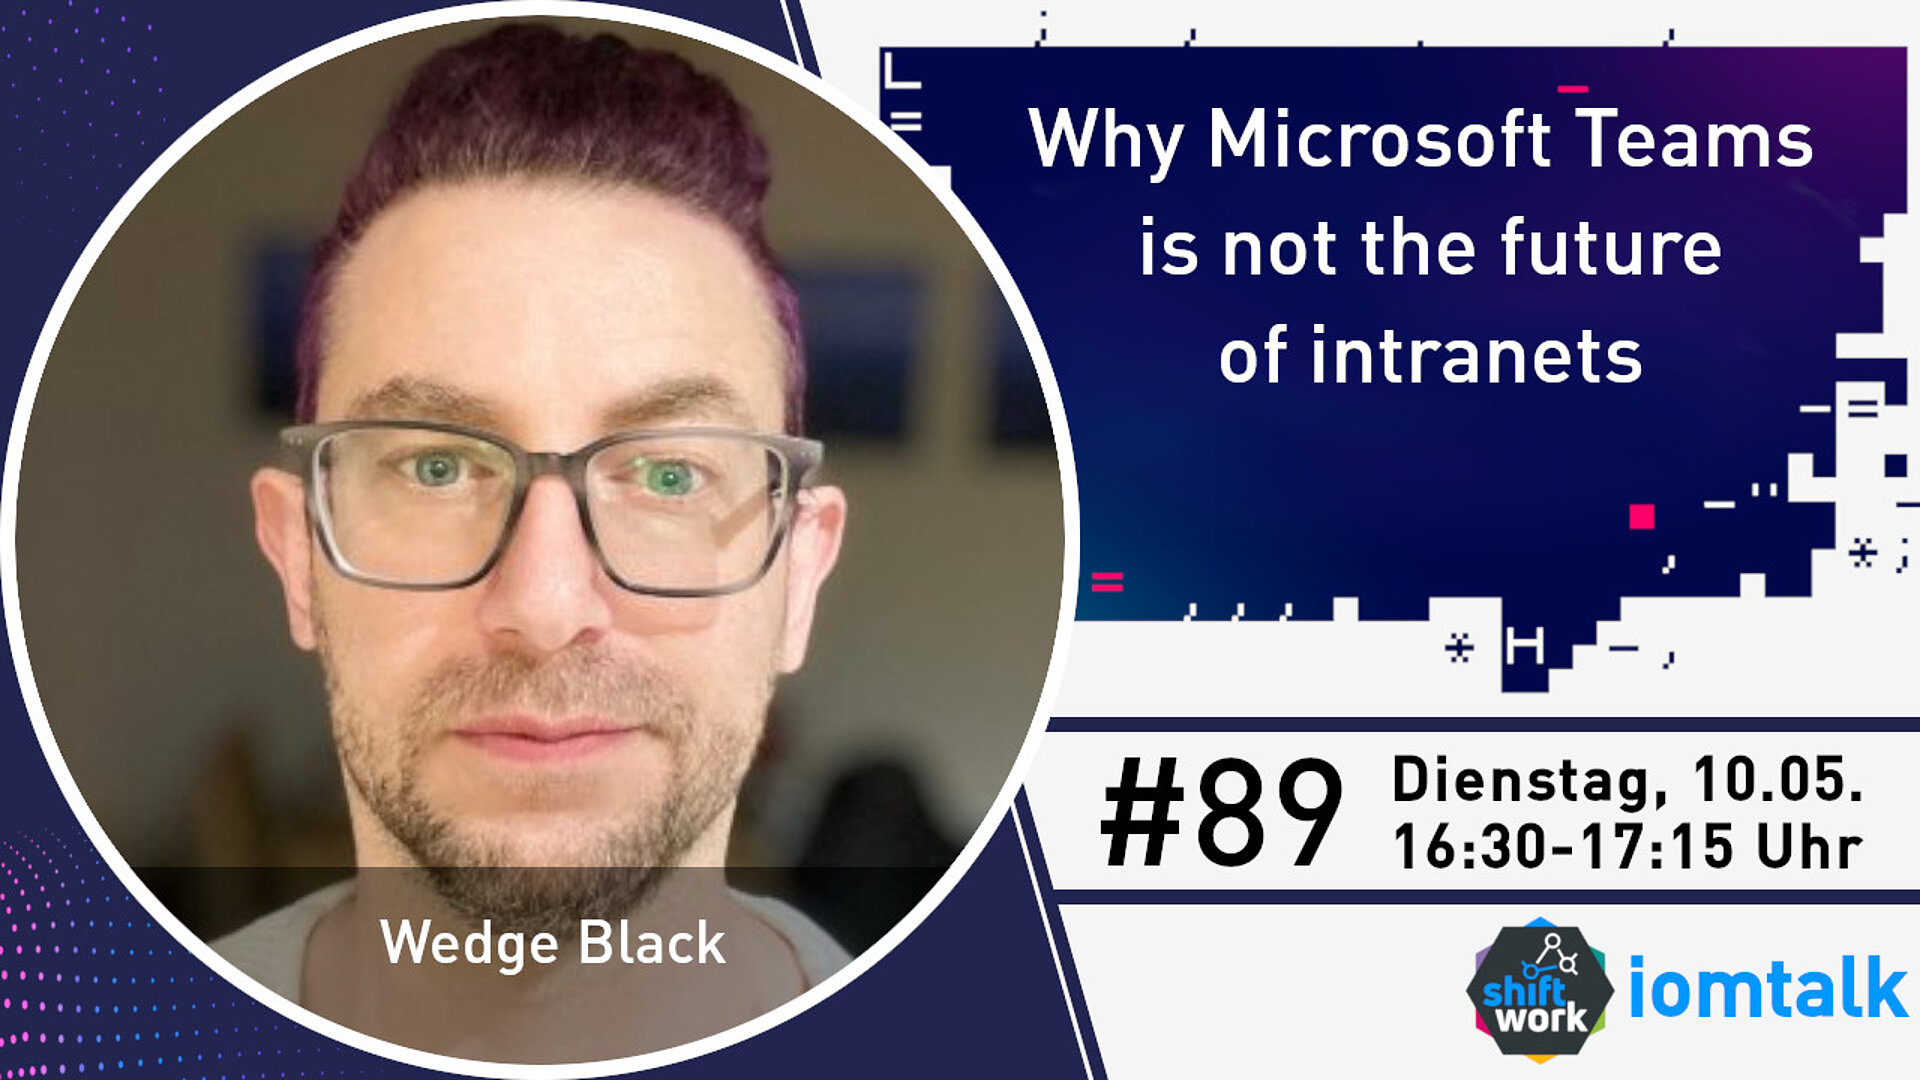 Im Gespräch mit Wedge Black zu "Why Microsoft Teams  is not the future of intranets""